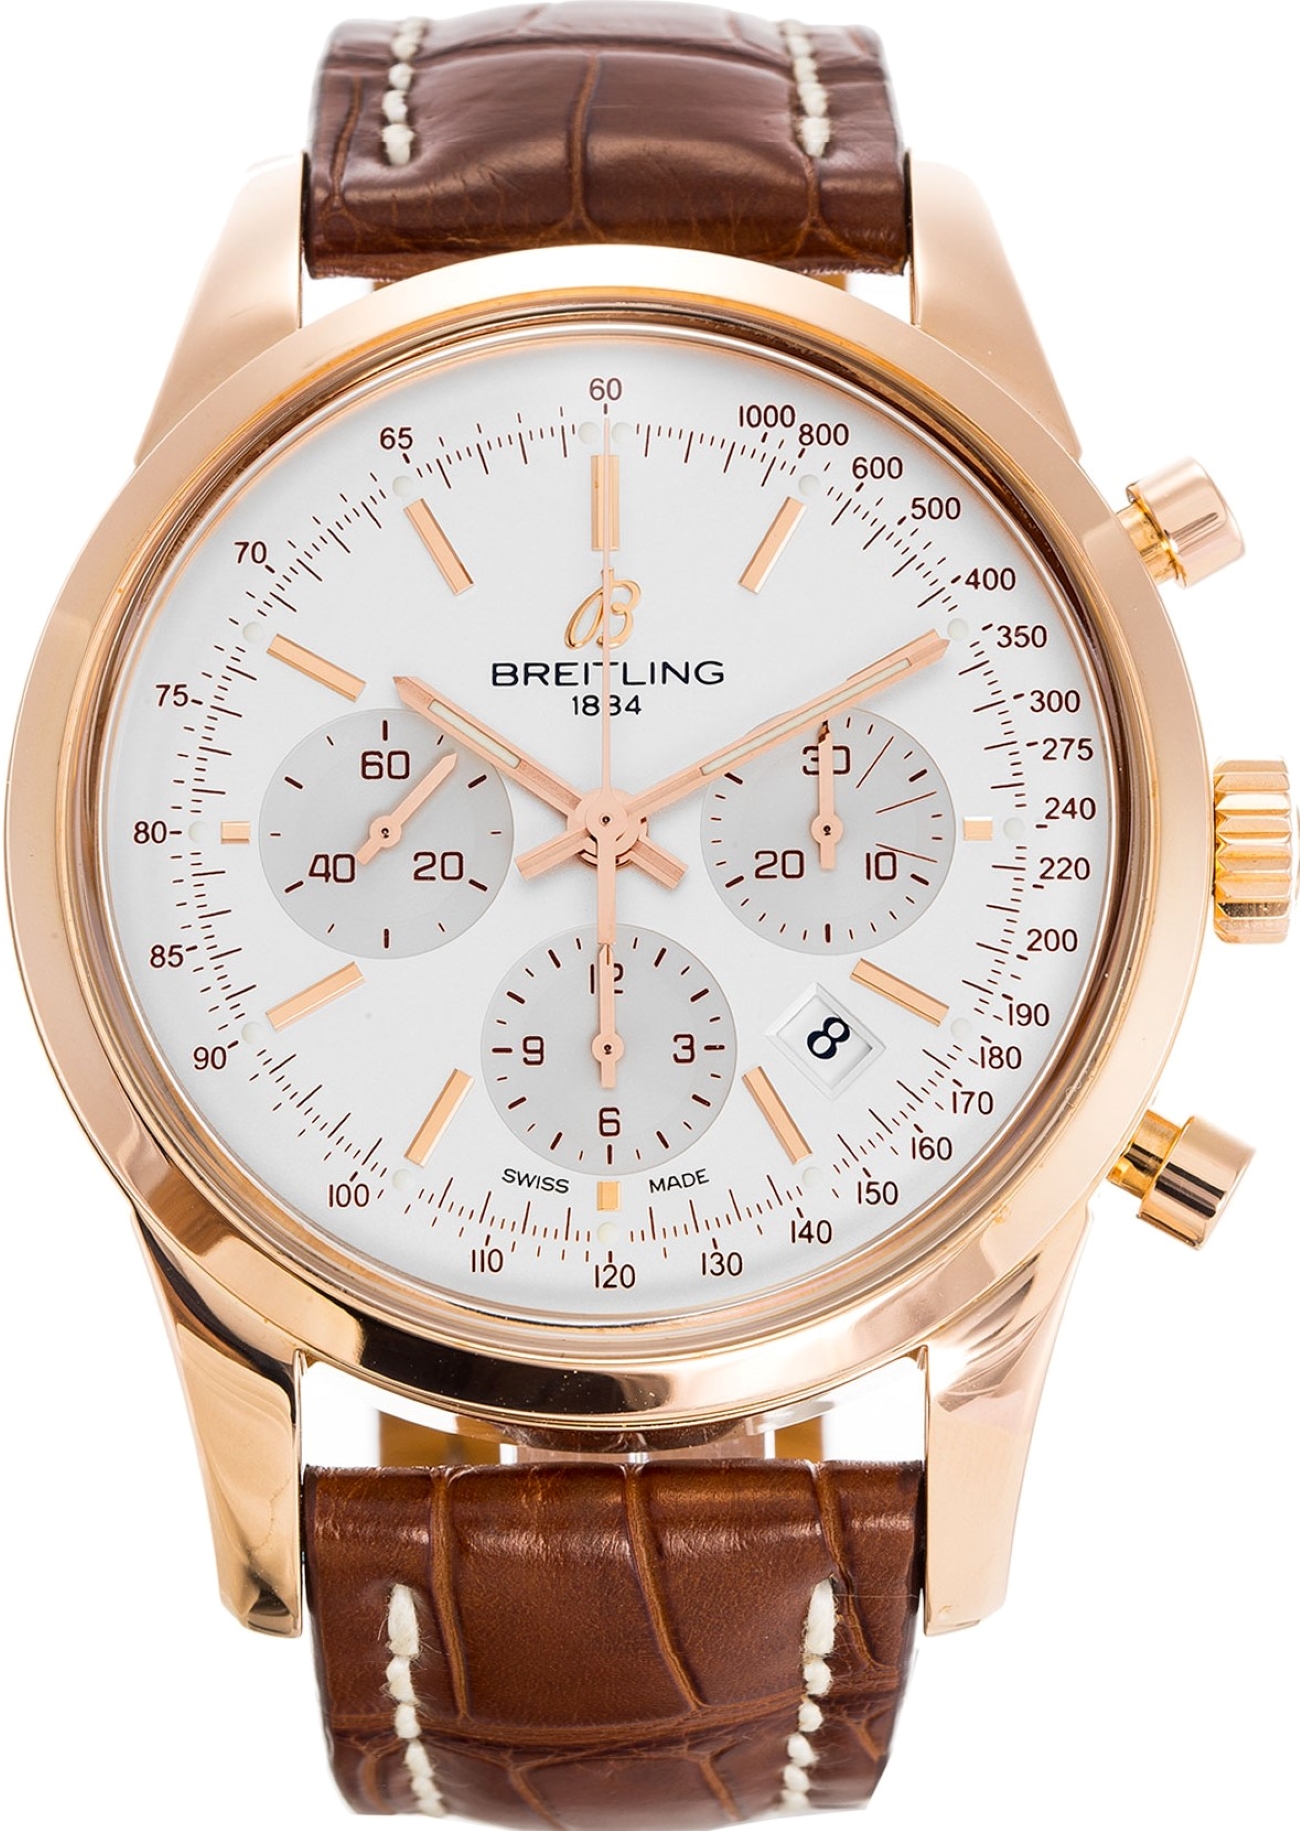 BREITLING TRANSOCEAN CHRONOGRAPH 43 MM ROSE GOLD REF: RB0152